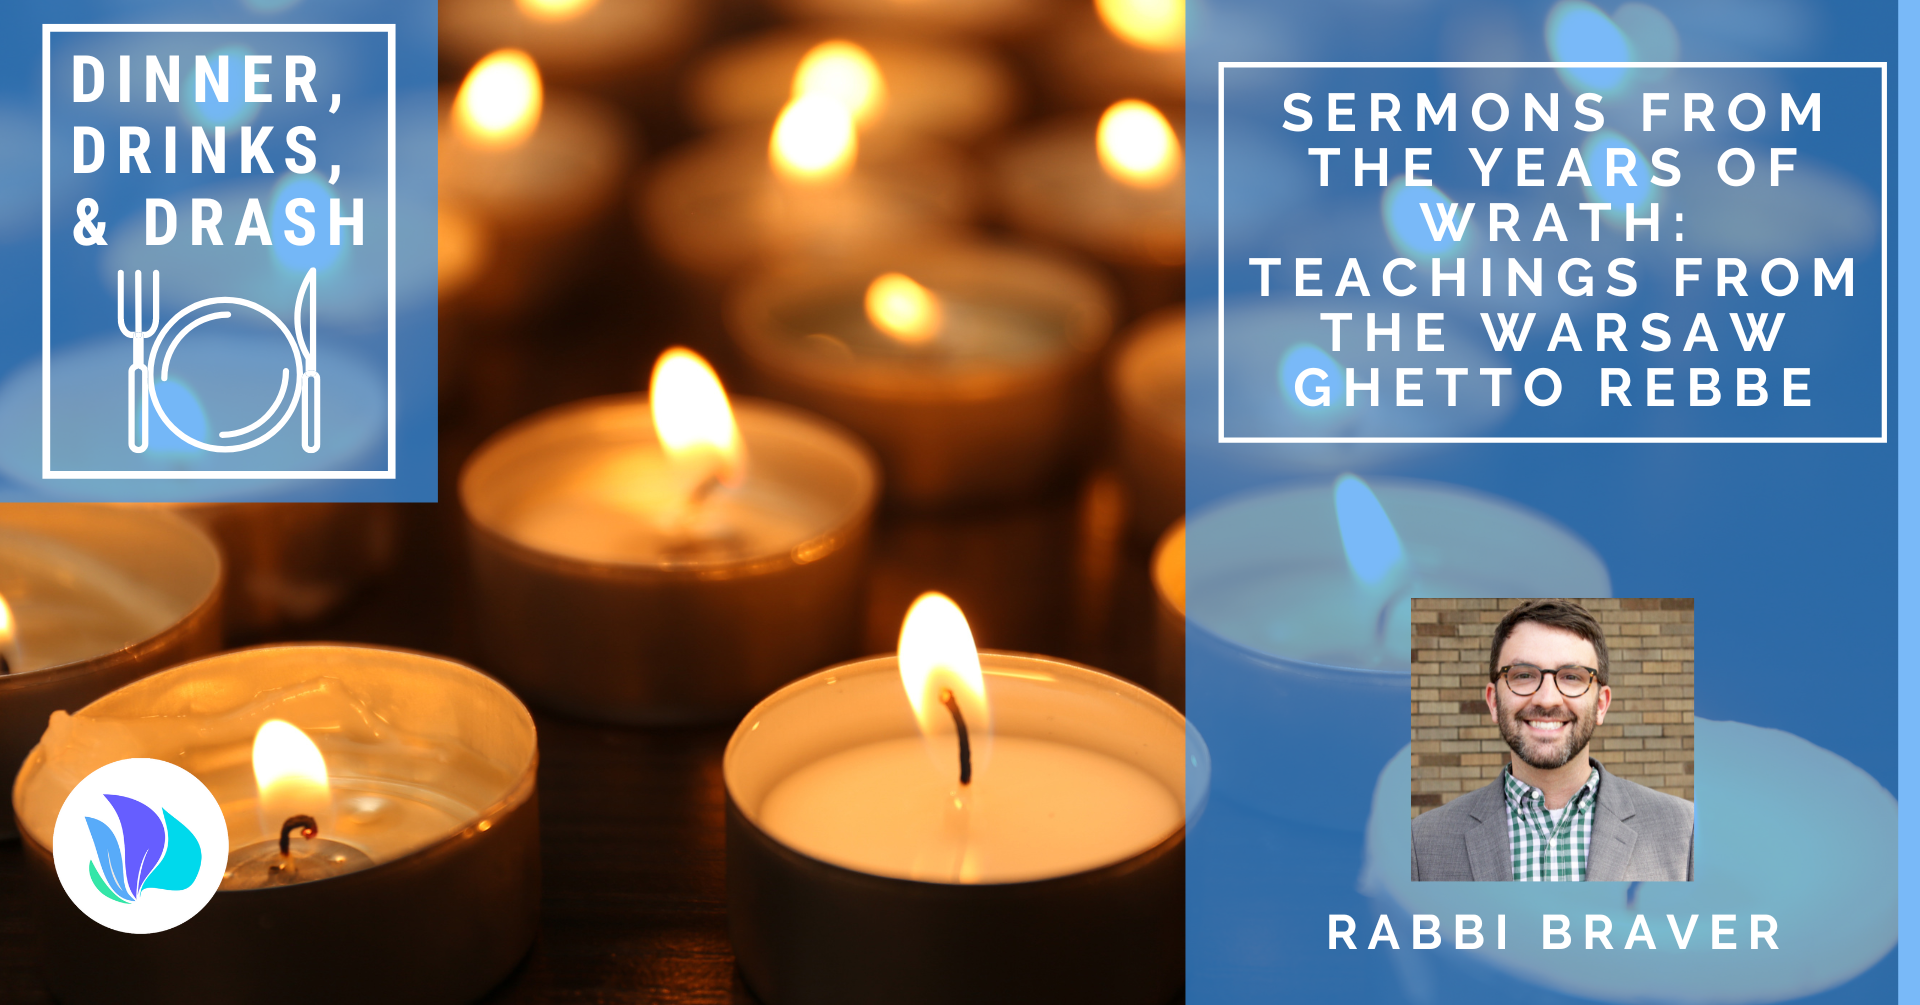 [Dinner, Drinks, & Drash] Sermons from the Years of Wrath: Teachings from the Warsaw Ghetto Rebbe